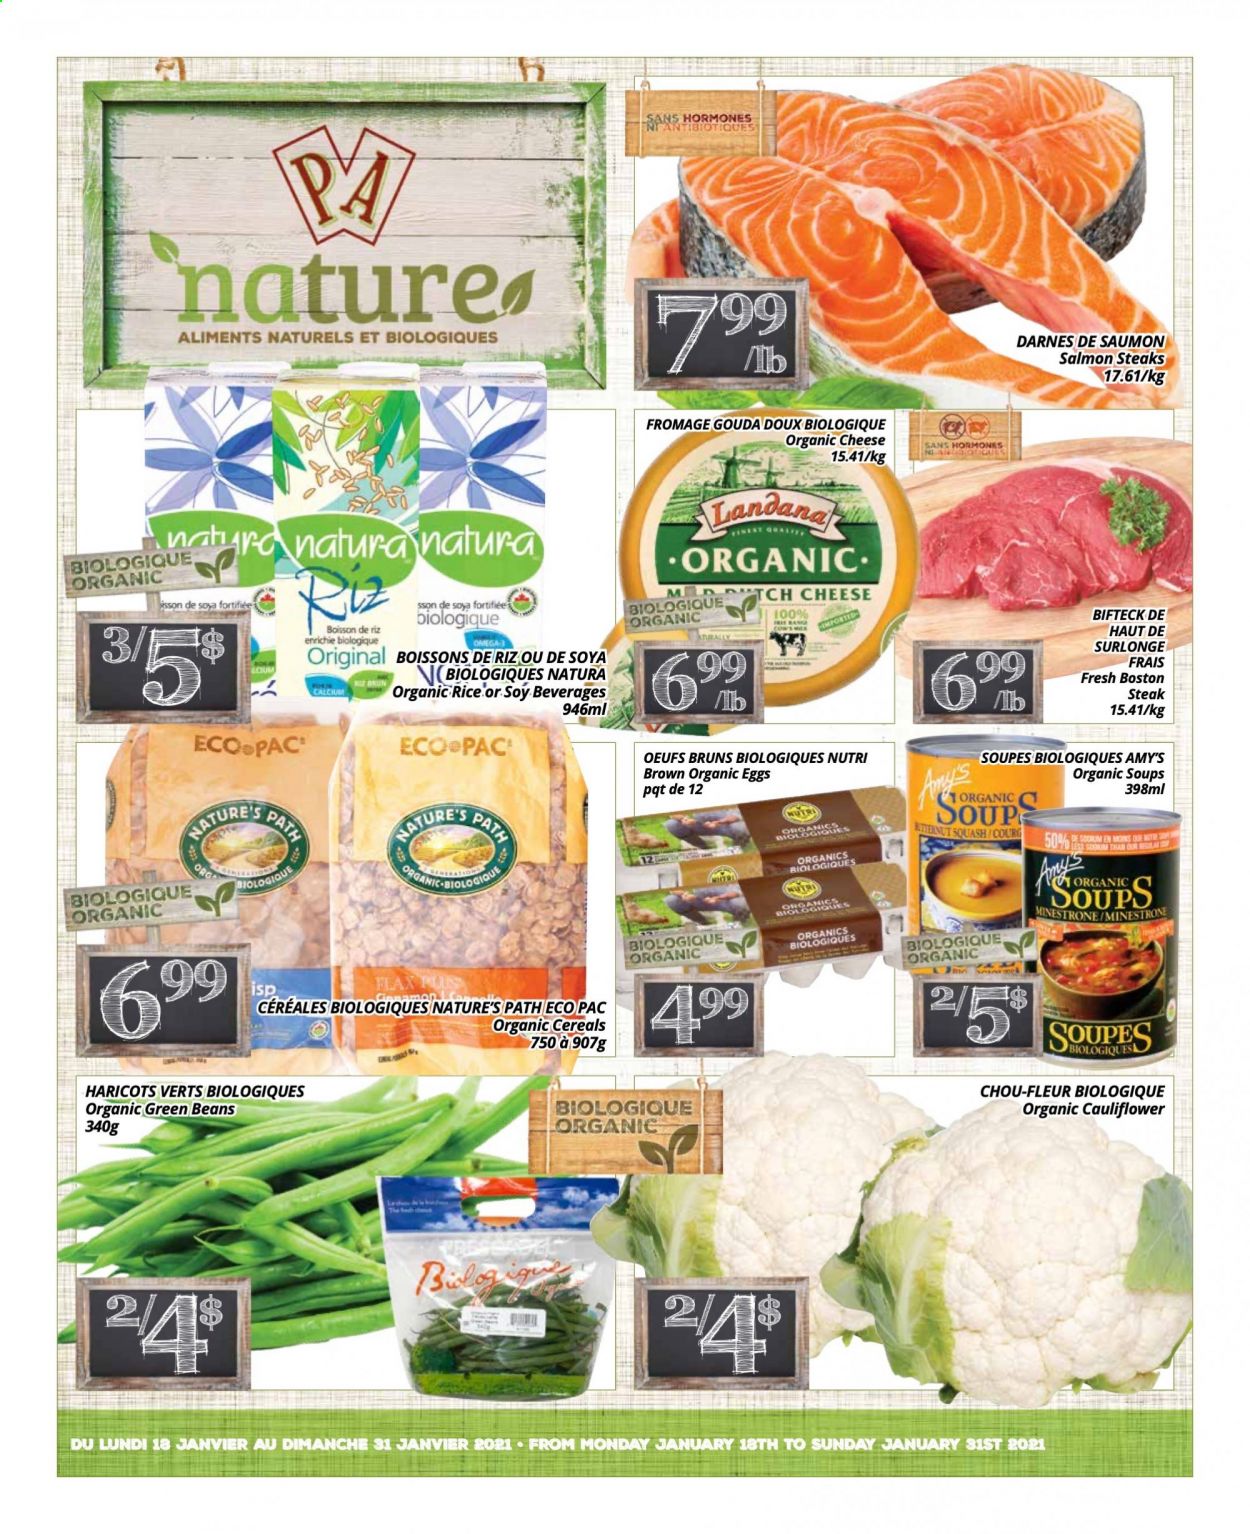 thumbnail - PA Nature Flyer - January 18, 2021 - January 31, 2021 - Sales products - beans, cauliflower, green beans, salmon, soup, gouda, cheese, eggs, cereals, cinnamon, steak. Page 1.